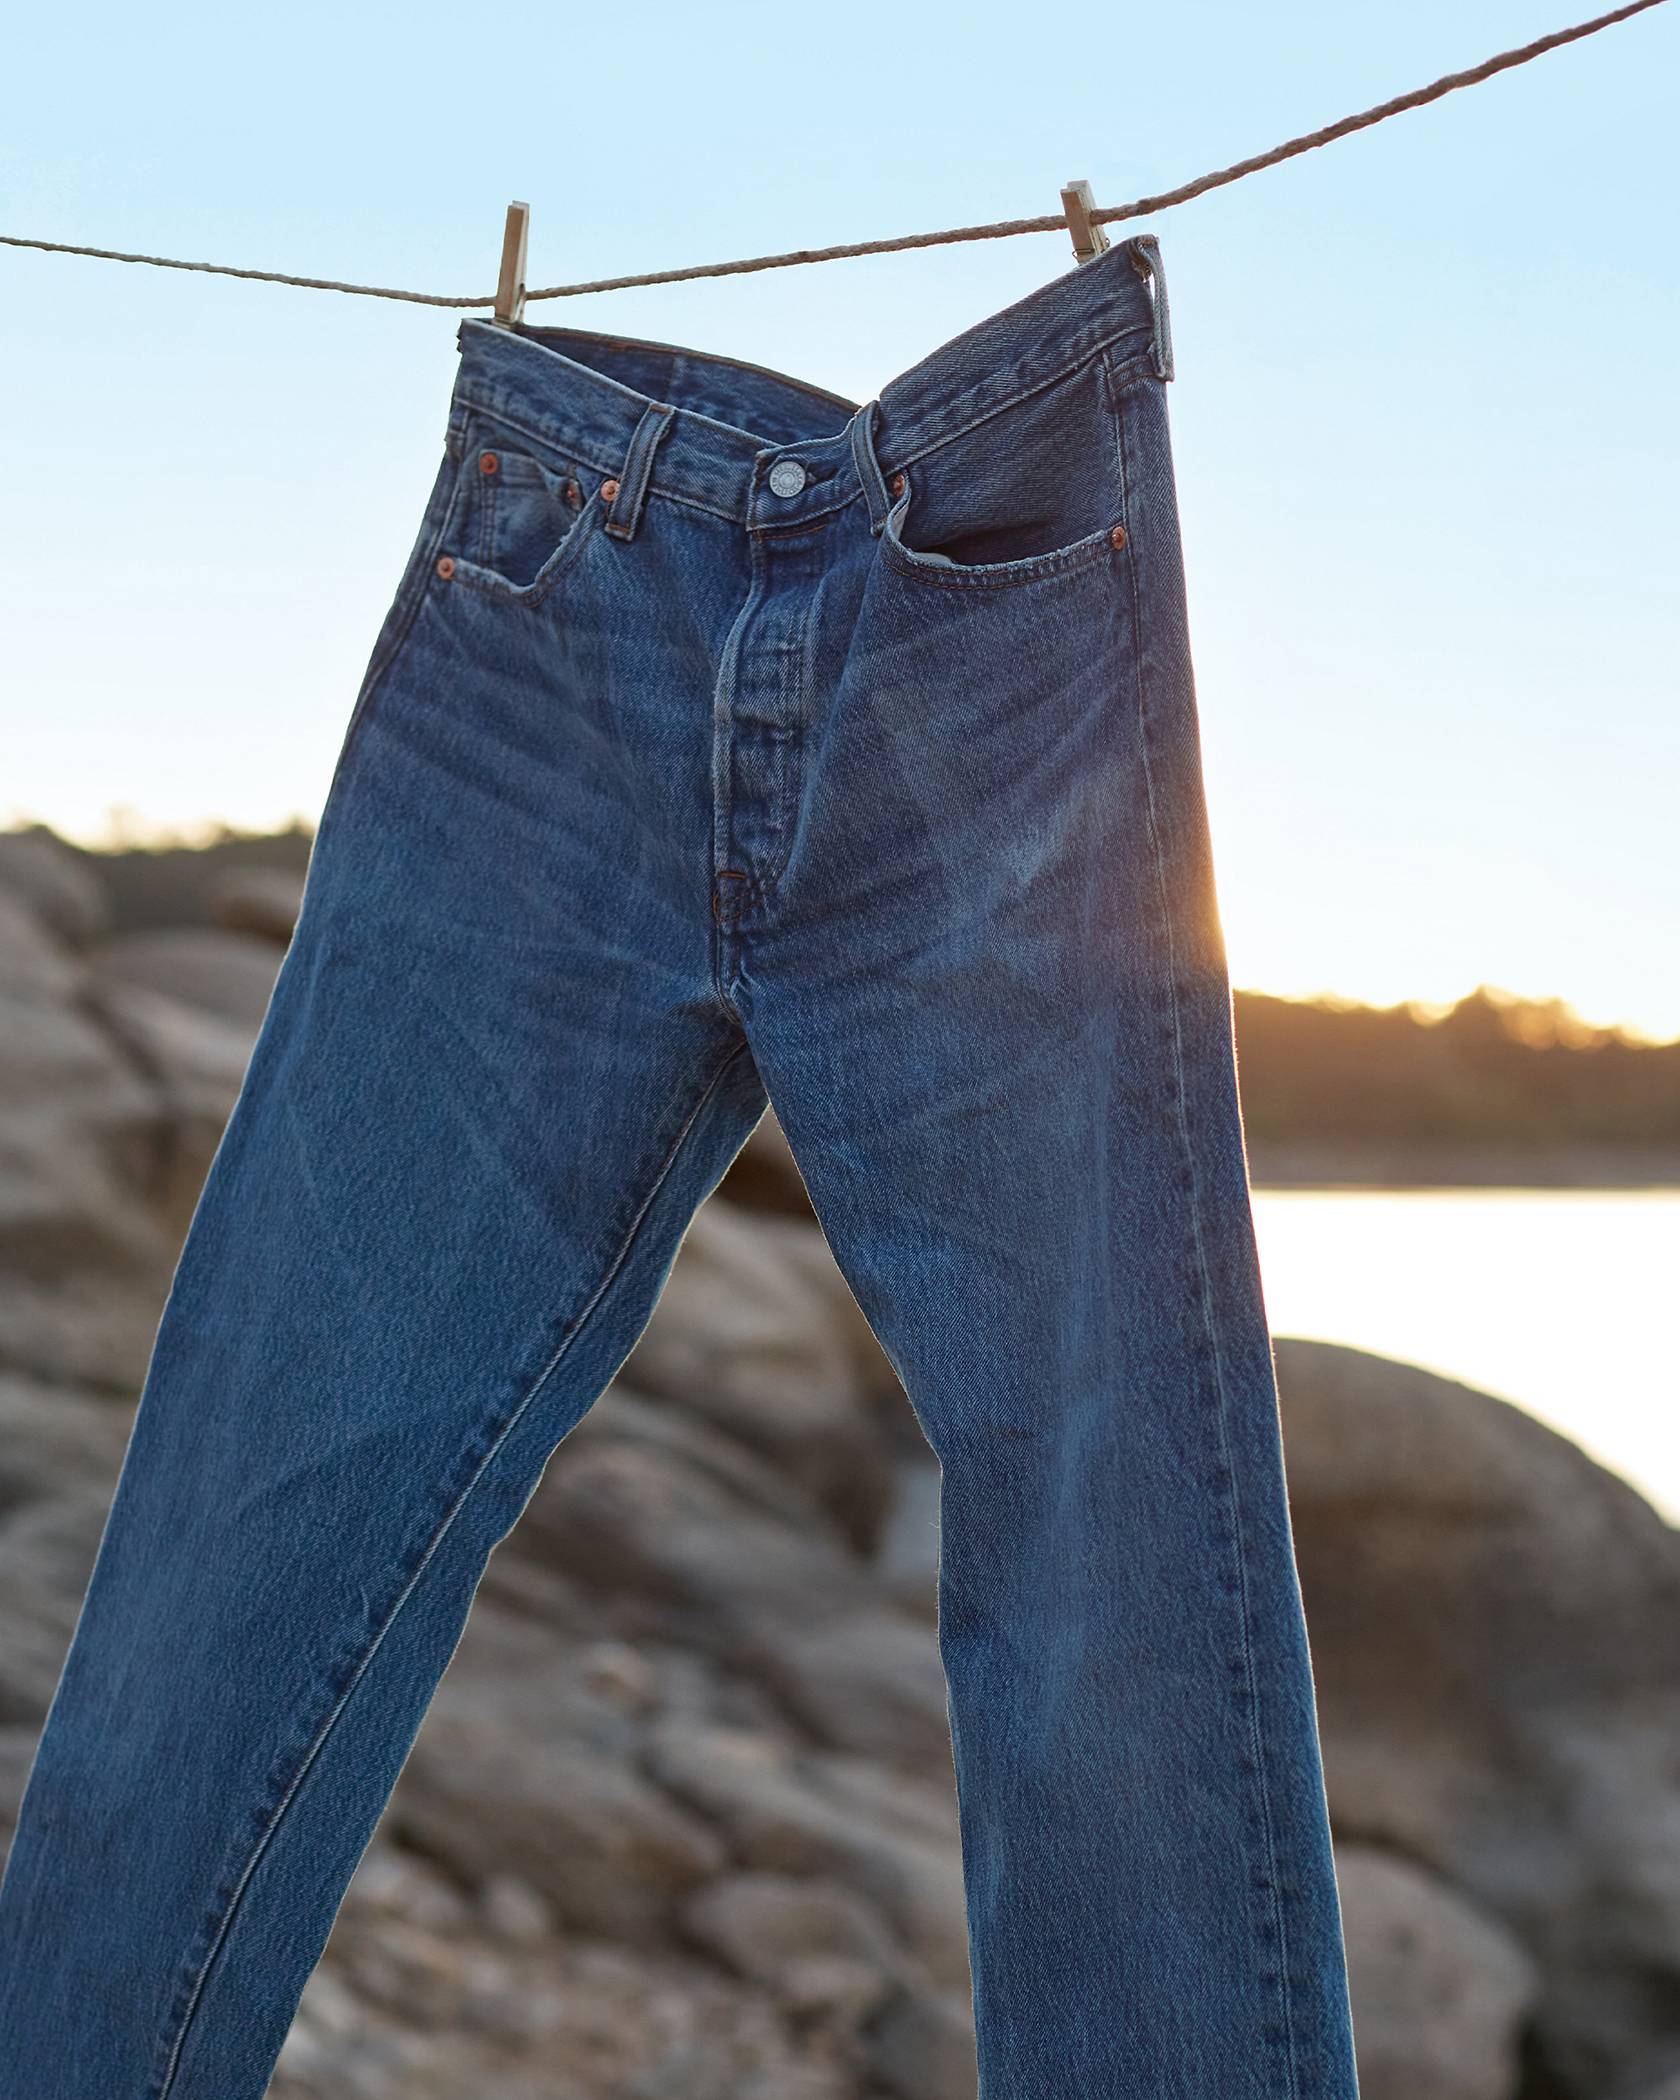 How to wash and dry jeans - Denim Care Guide | Levi's® US